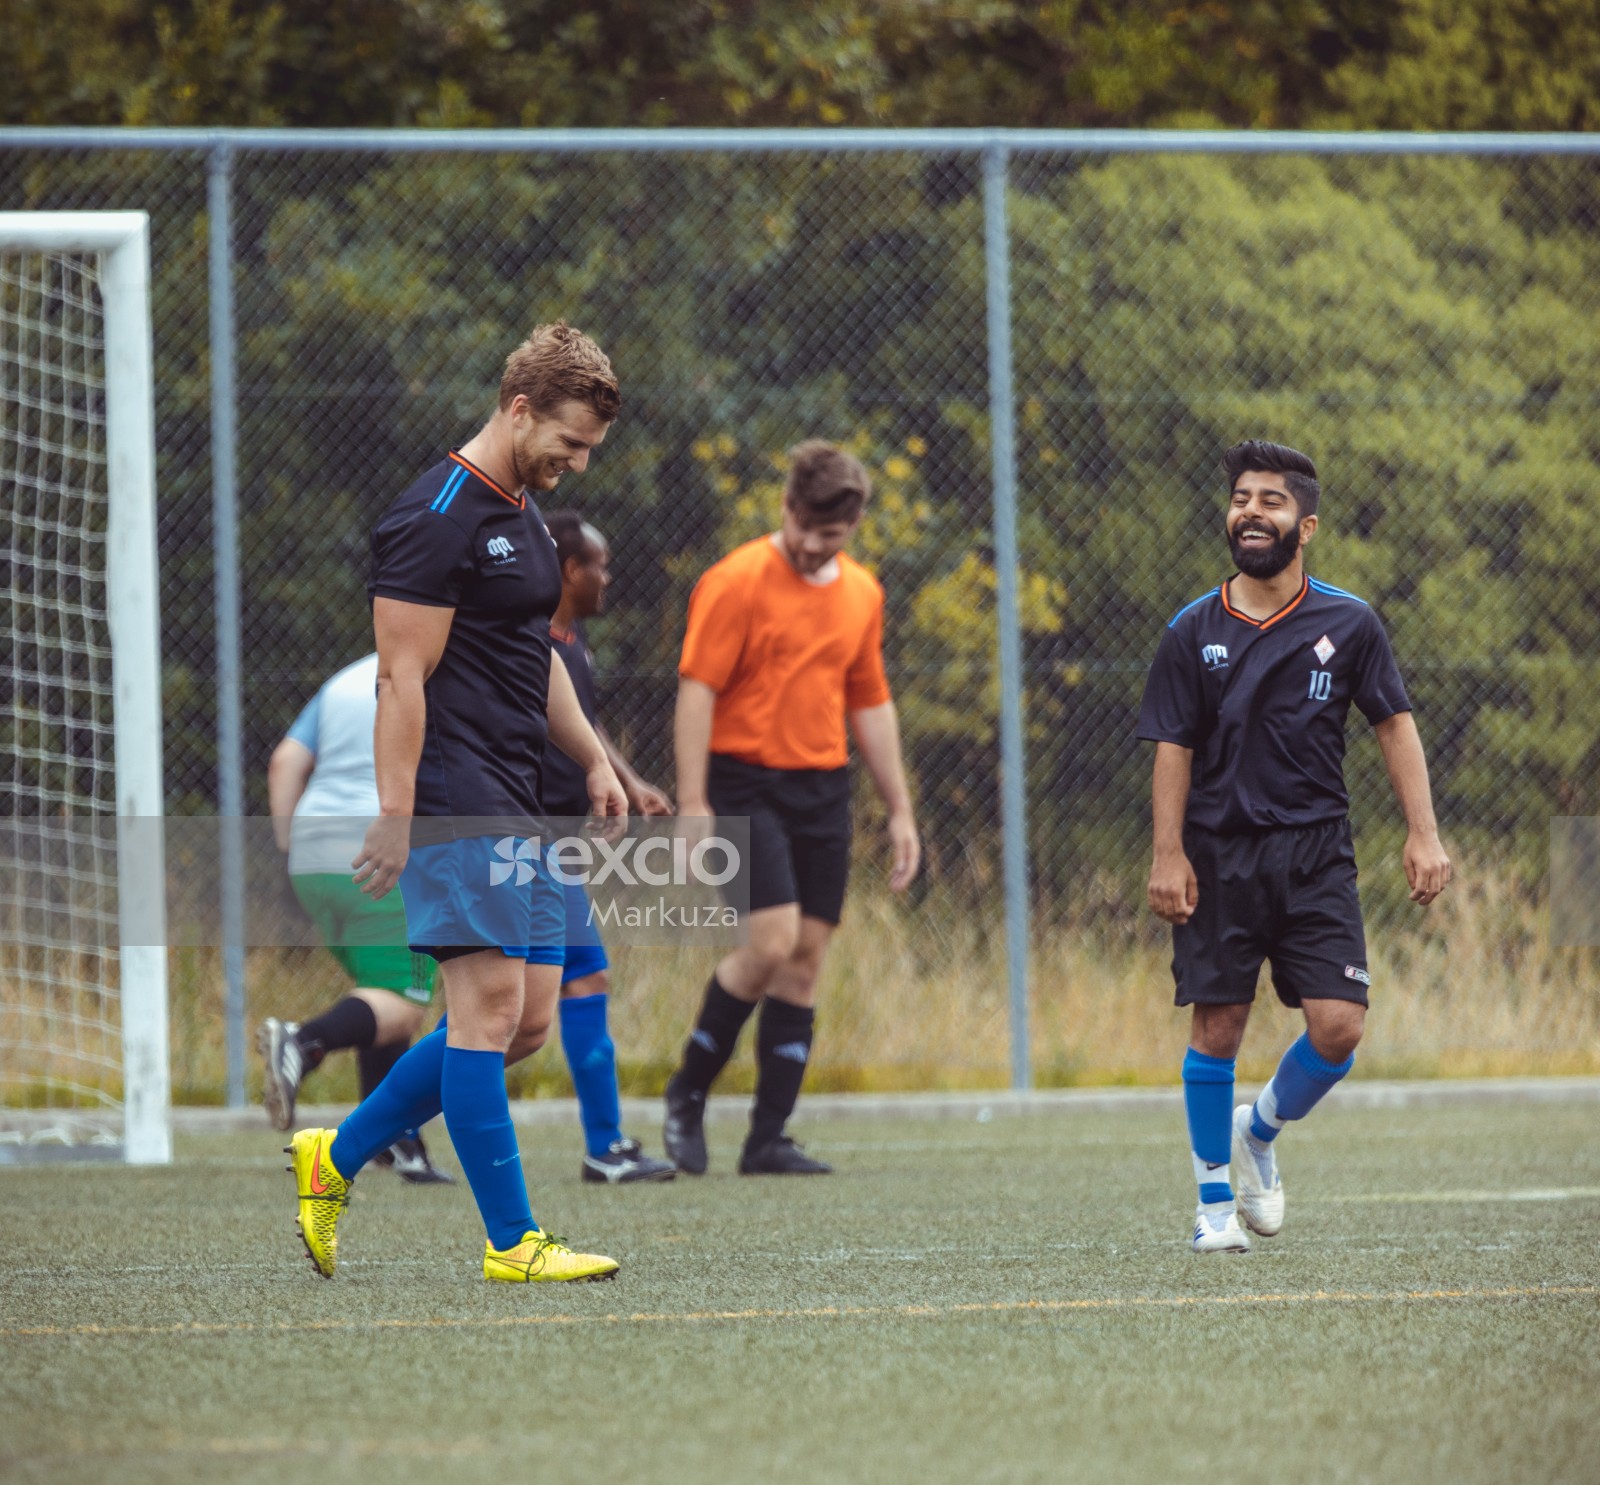 Teammates in black shirts giggling in the field - Sports Zone sunday league